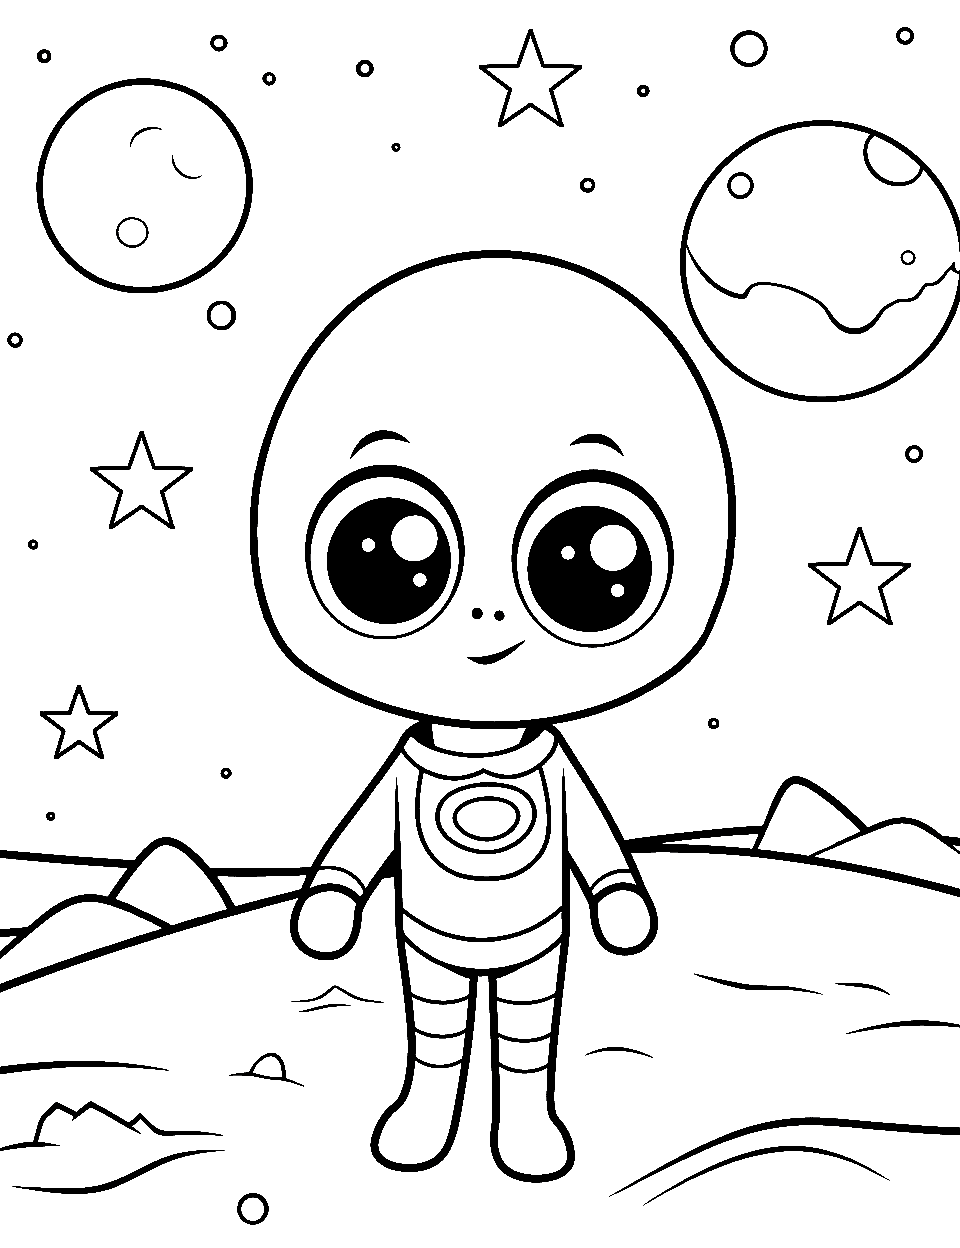 Cute Alien on Mars Coloring Page - A kawaii-style alien on the red surface of Mars.